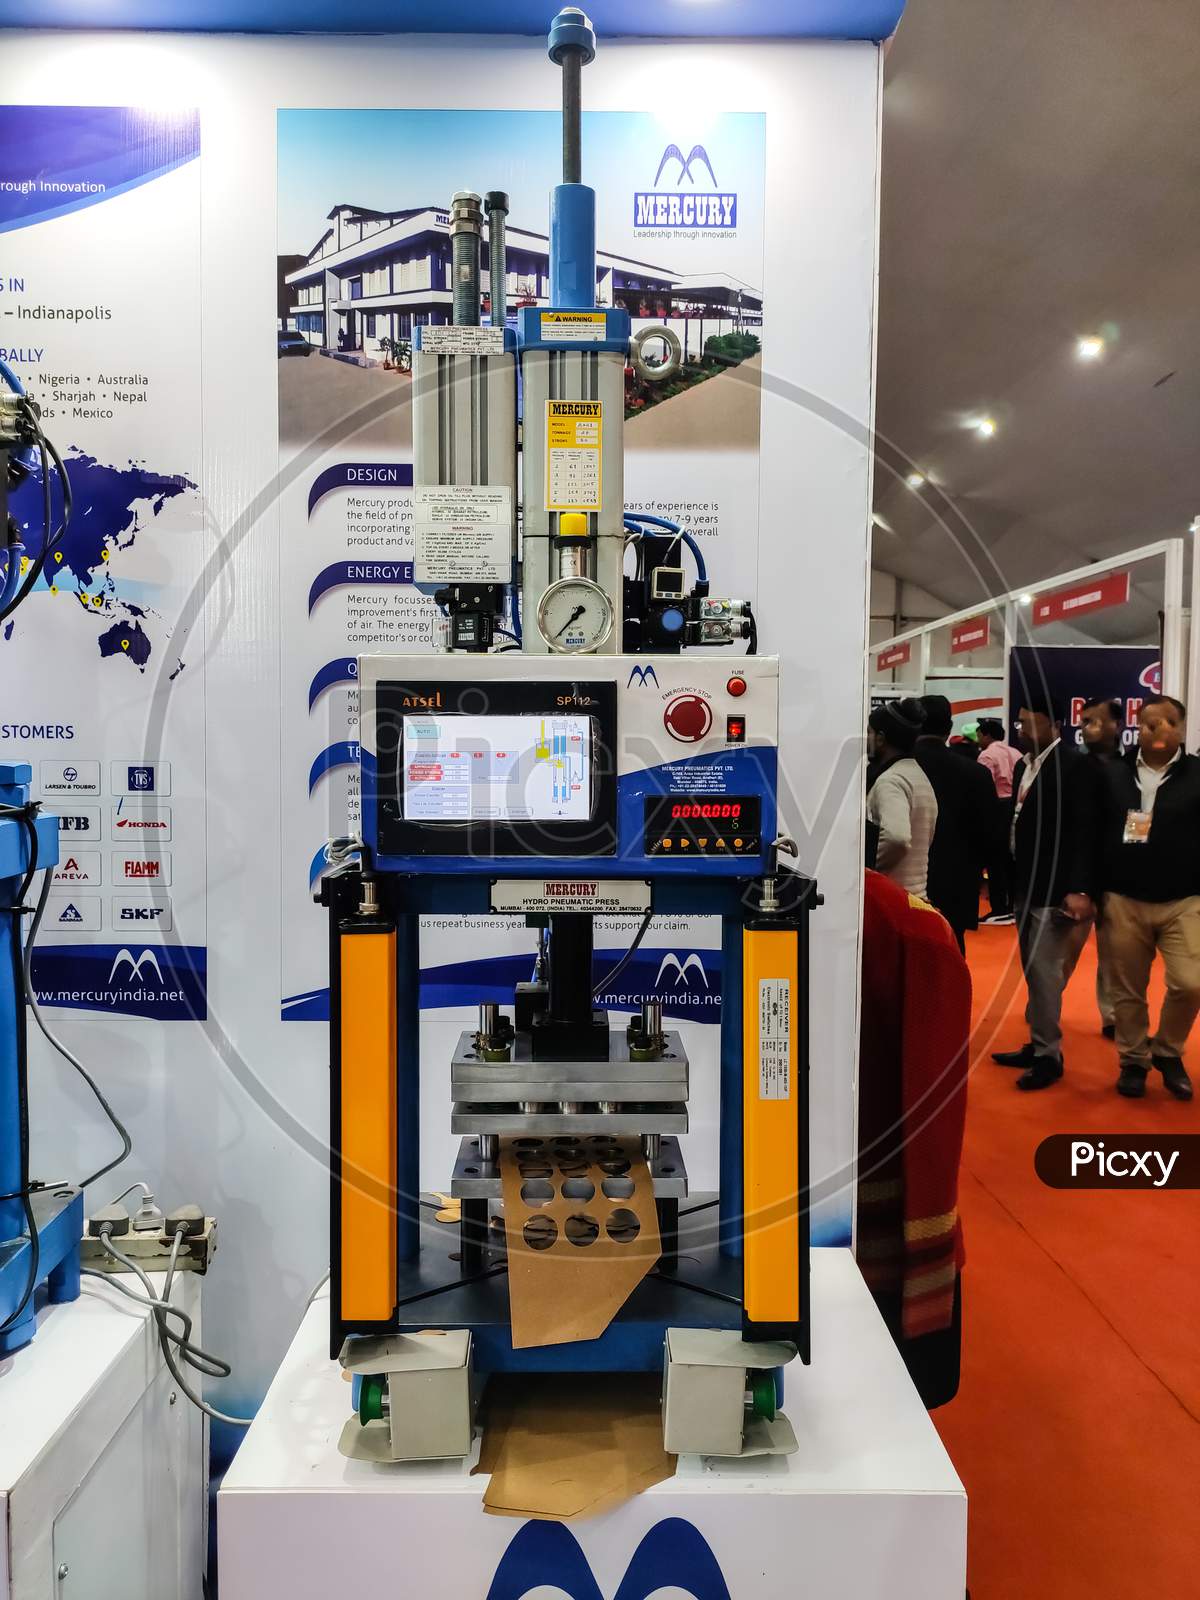 pneumatic power press  Machine in exhibition in Ludhiana Punjab India on 23-24 February 2020. Exhibition organize by Mach expo